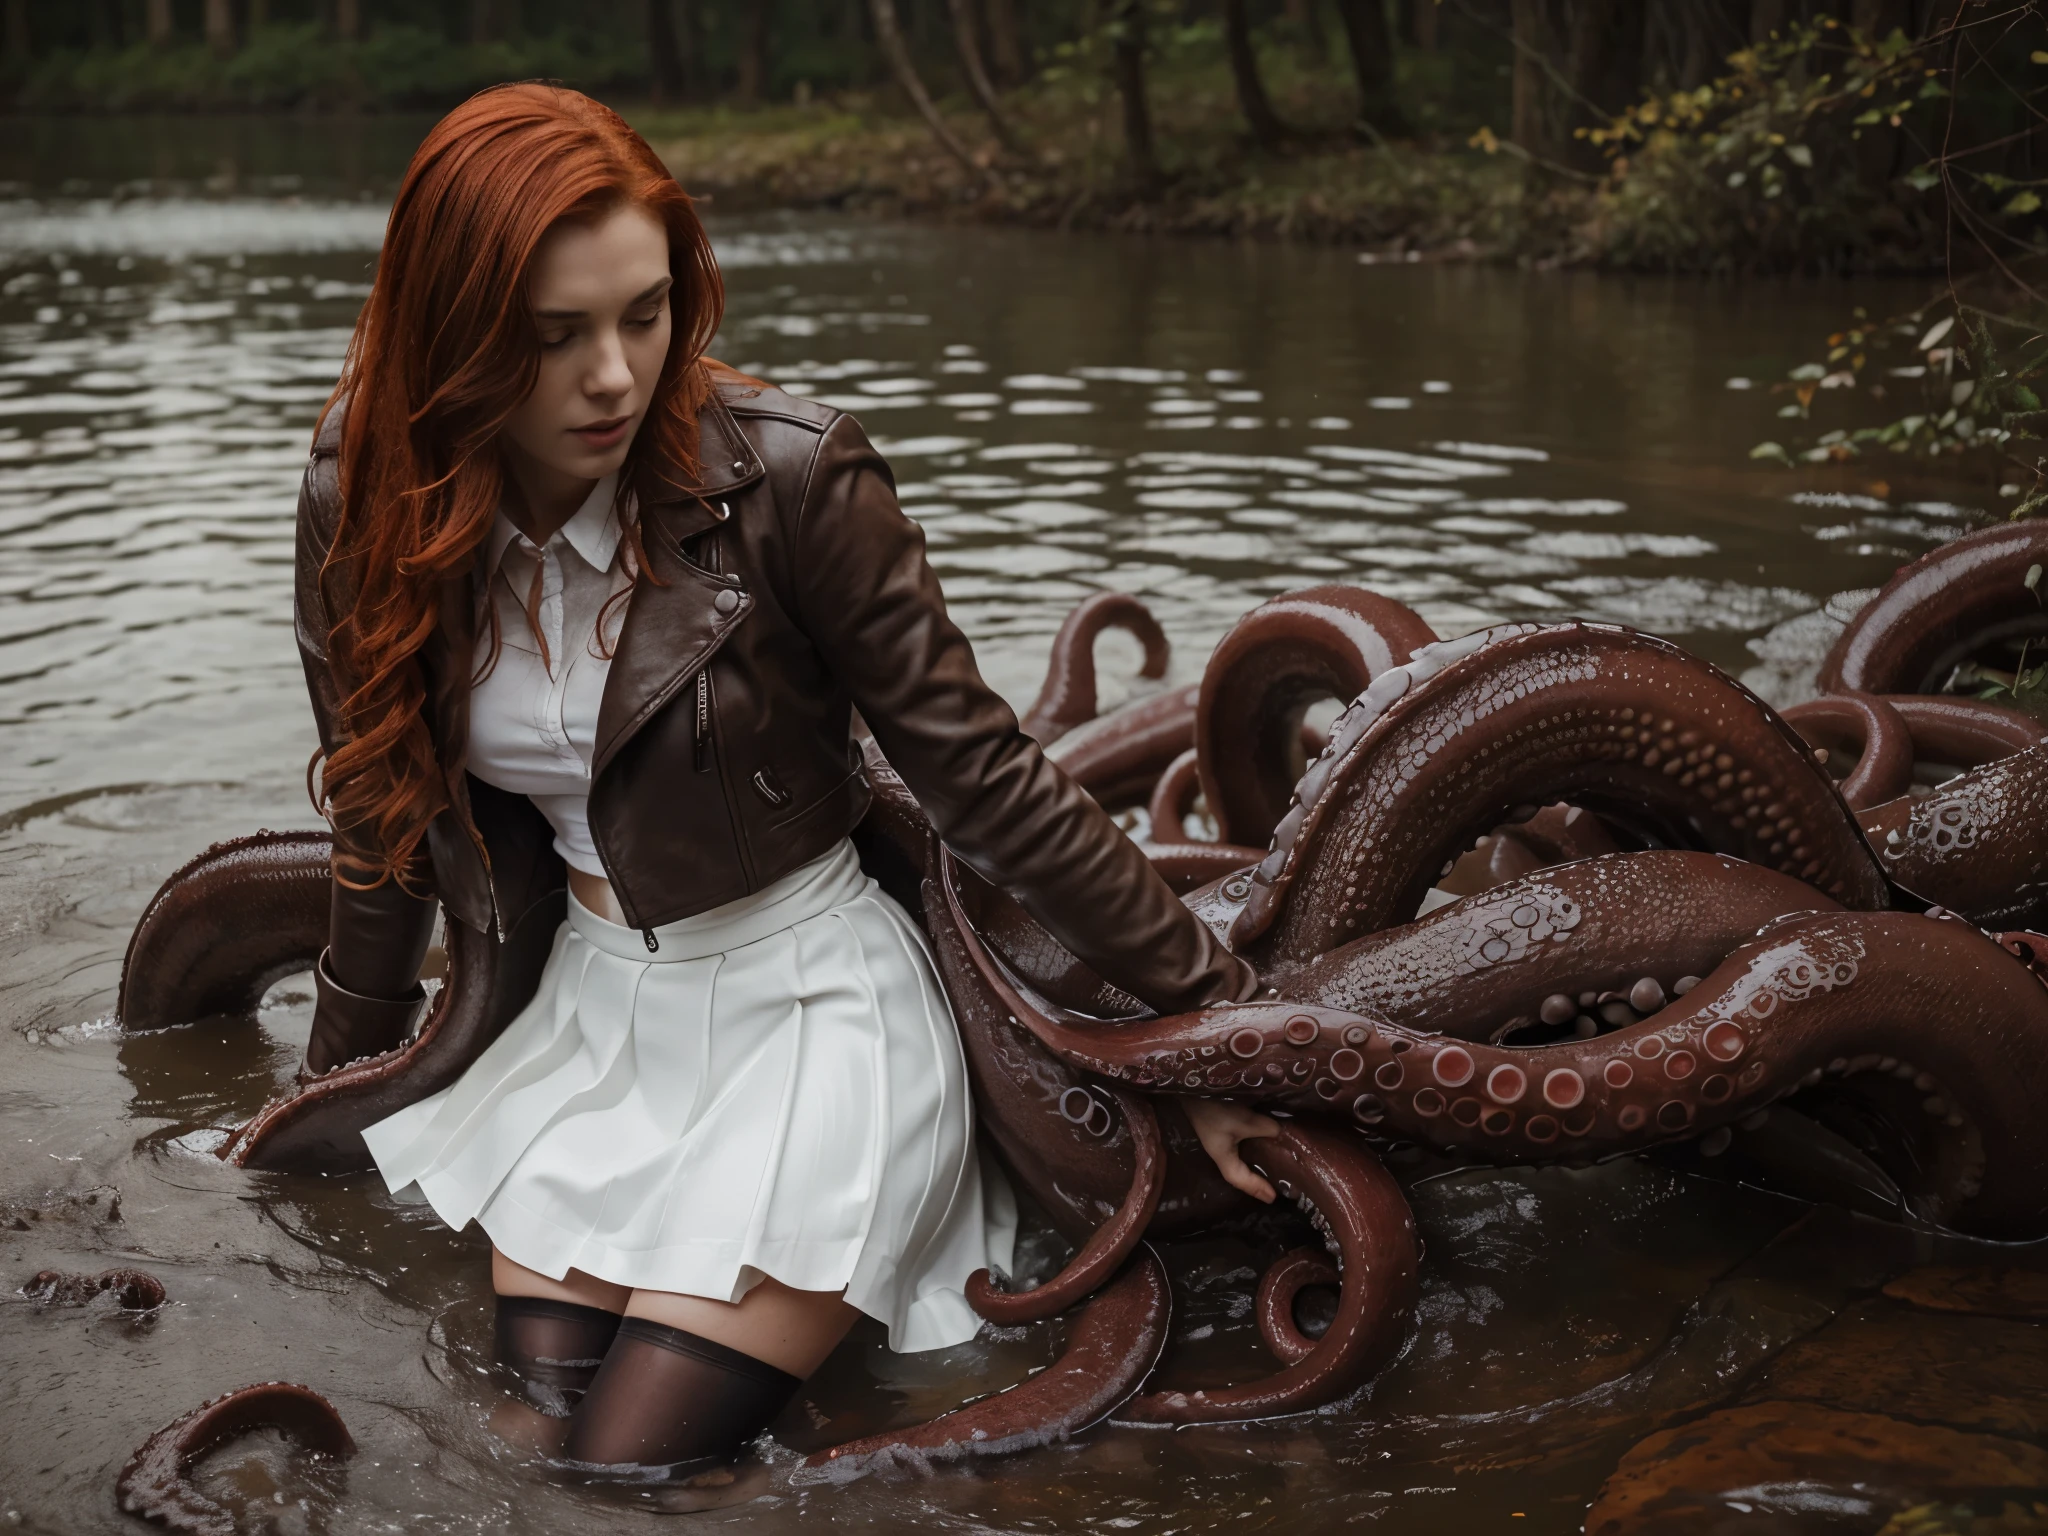 woods. warm lighting, 20 years old woman, (sensually drowning in a lake), ((white skirt)), Stockings with garters, leather jacket. (Tormented by lust:1.3), (emaciated face:1.3),  Copper-red hair, tentacles in the water, some tentacles are touching her, big tentacle sneak around, fantasy creatures, tentacles around, tentacles in the background, tentacle beast, tentacle monster, full body view, wet fluid, wet ground,fullframe